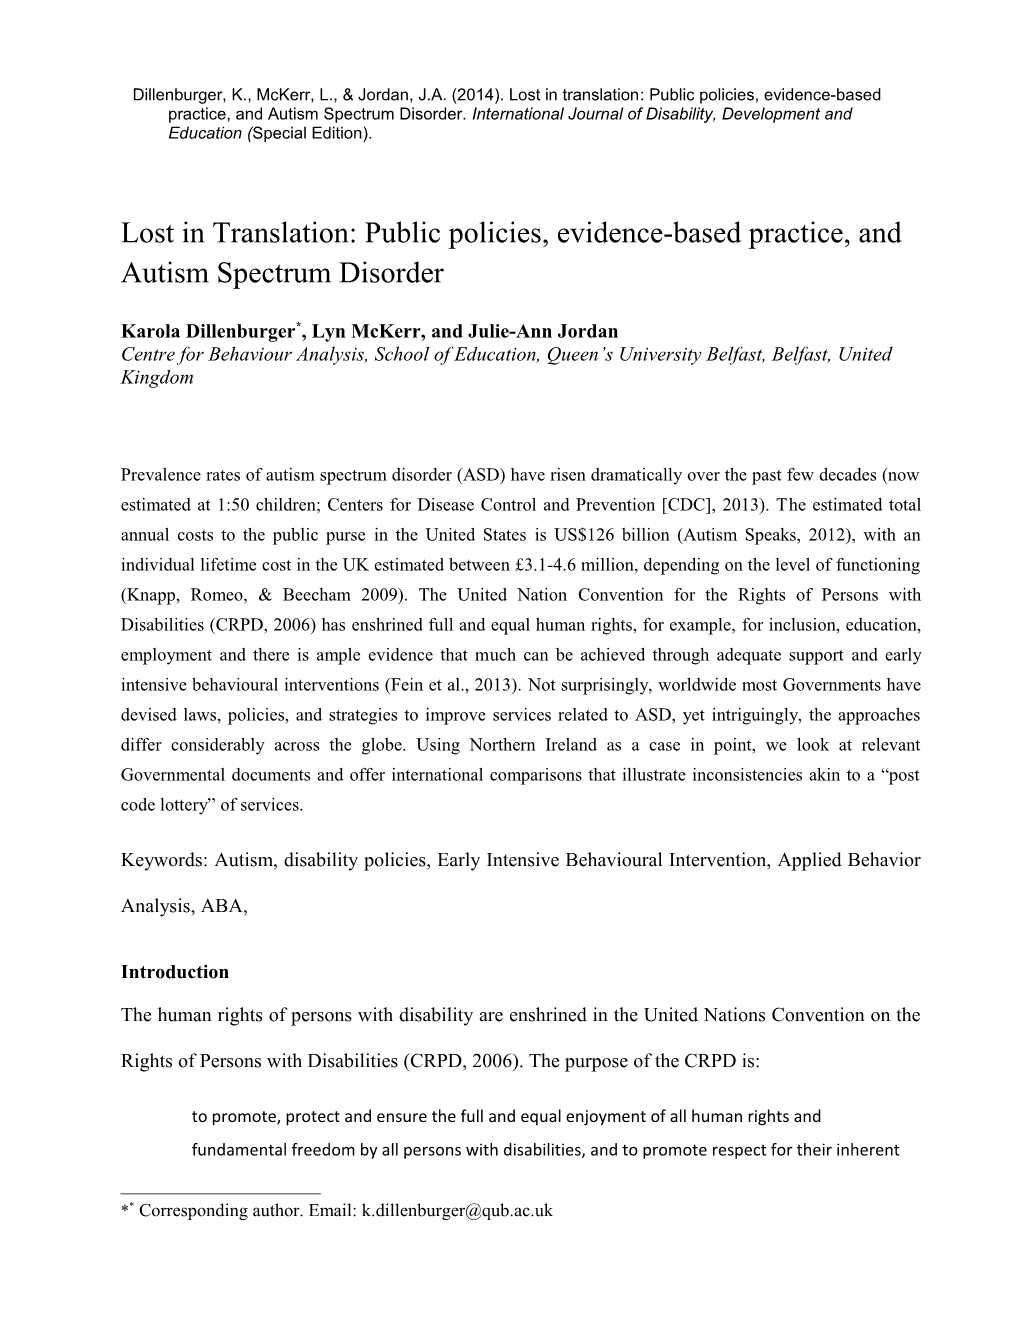 Public Policies, Evidence-Based Practice, and Autism Spectrum Disorder 1